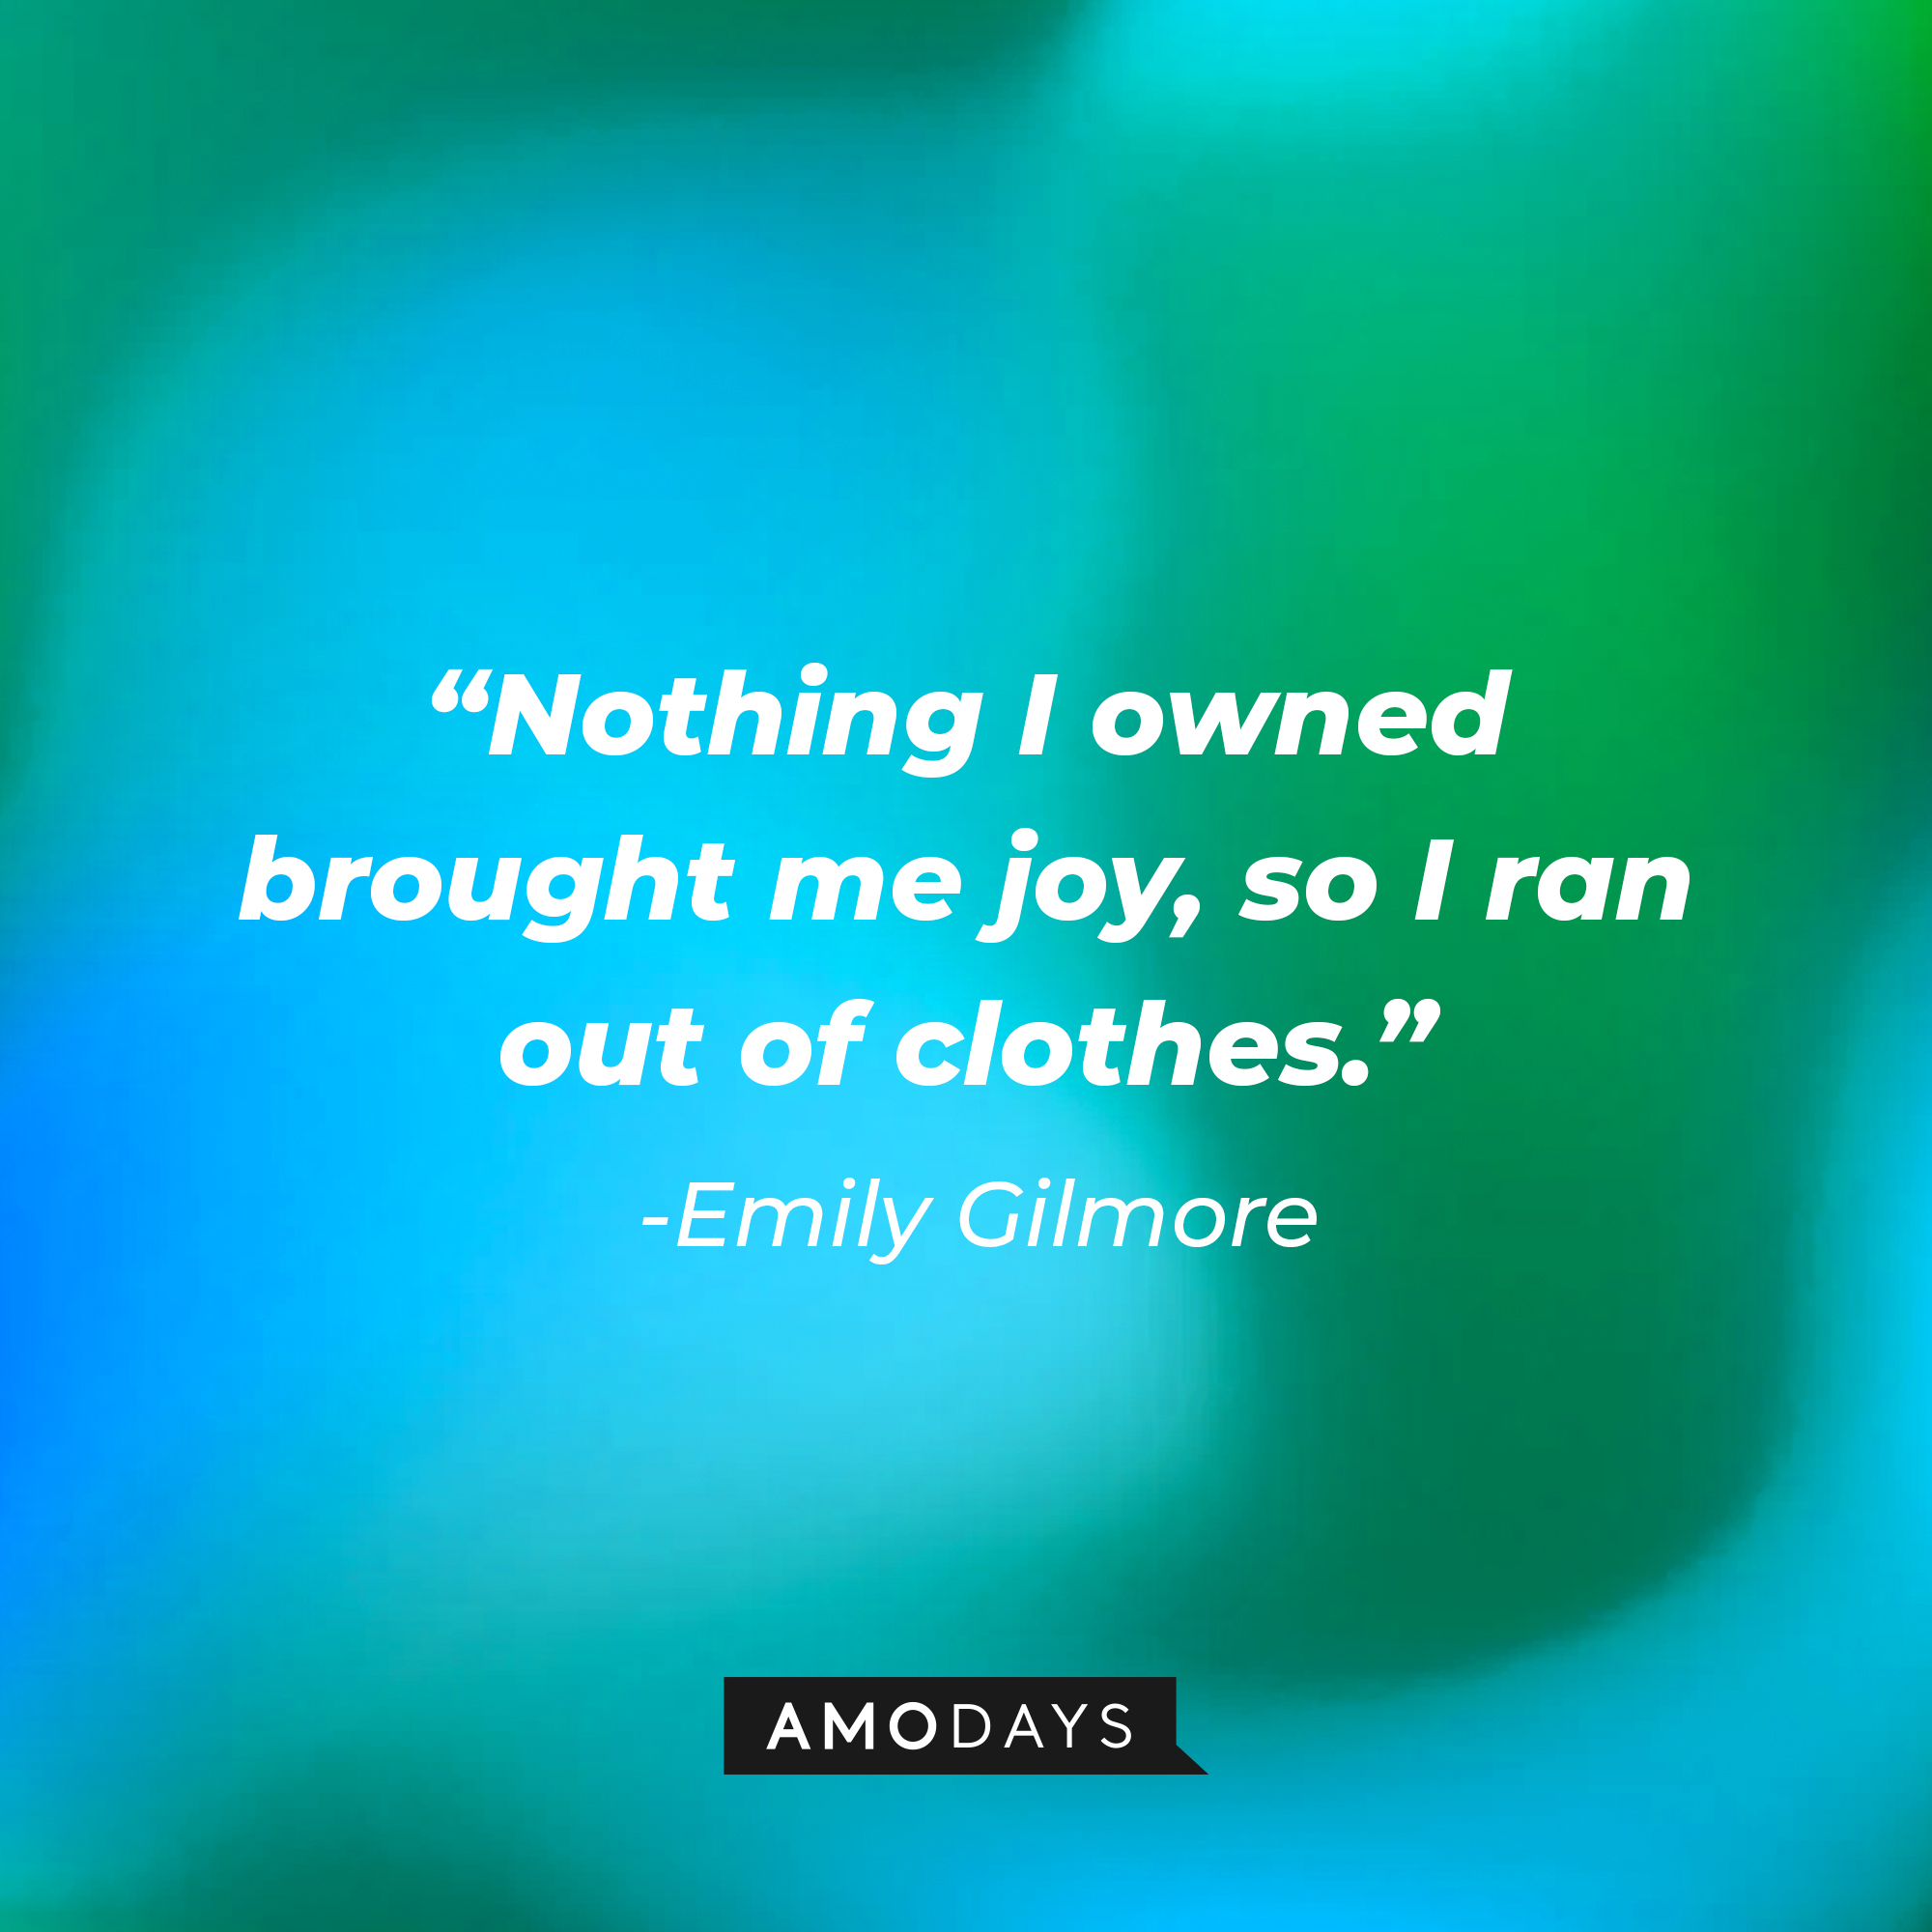 Emily Gilmore's quote: "Nothing I owned brought me joy, so I ran out of clothes." | Source: Amodays